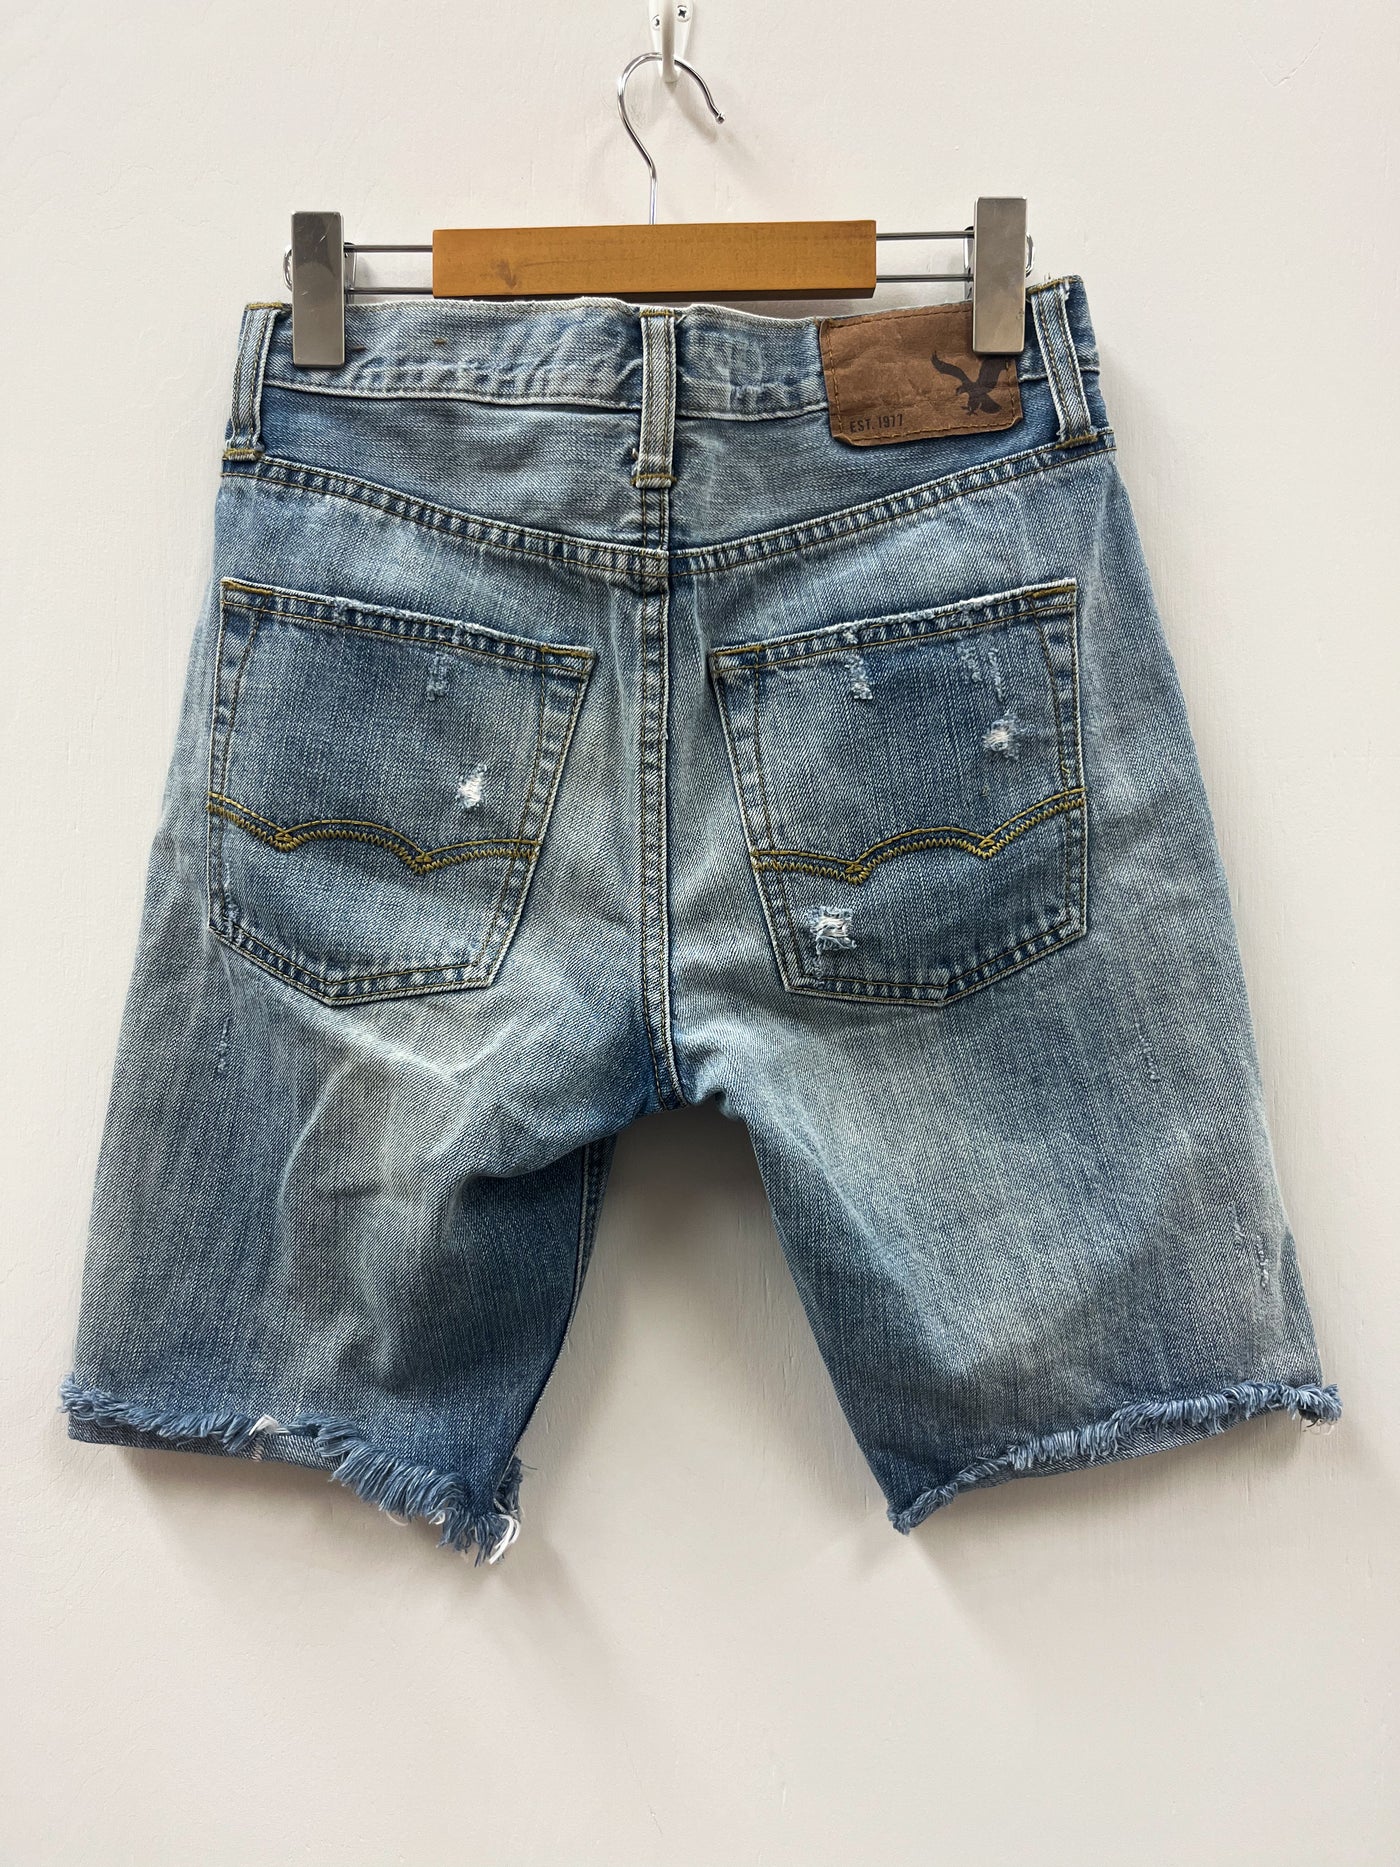 American Eagle outfitters denim shorts